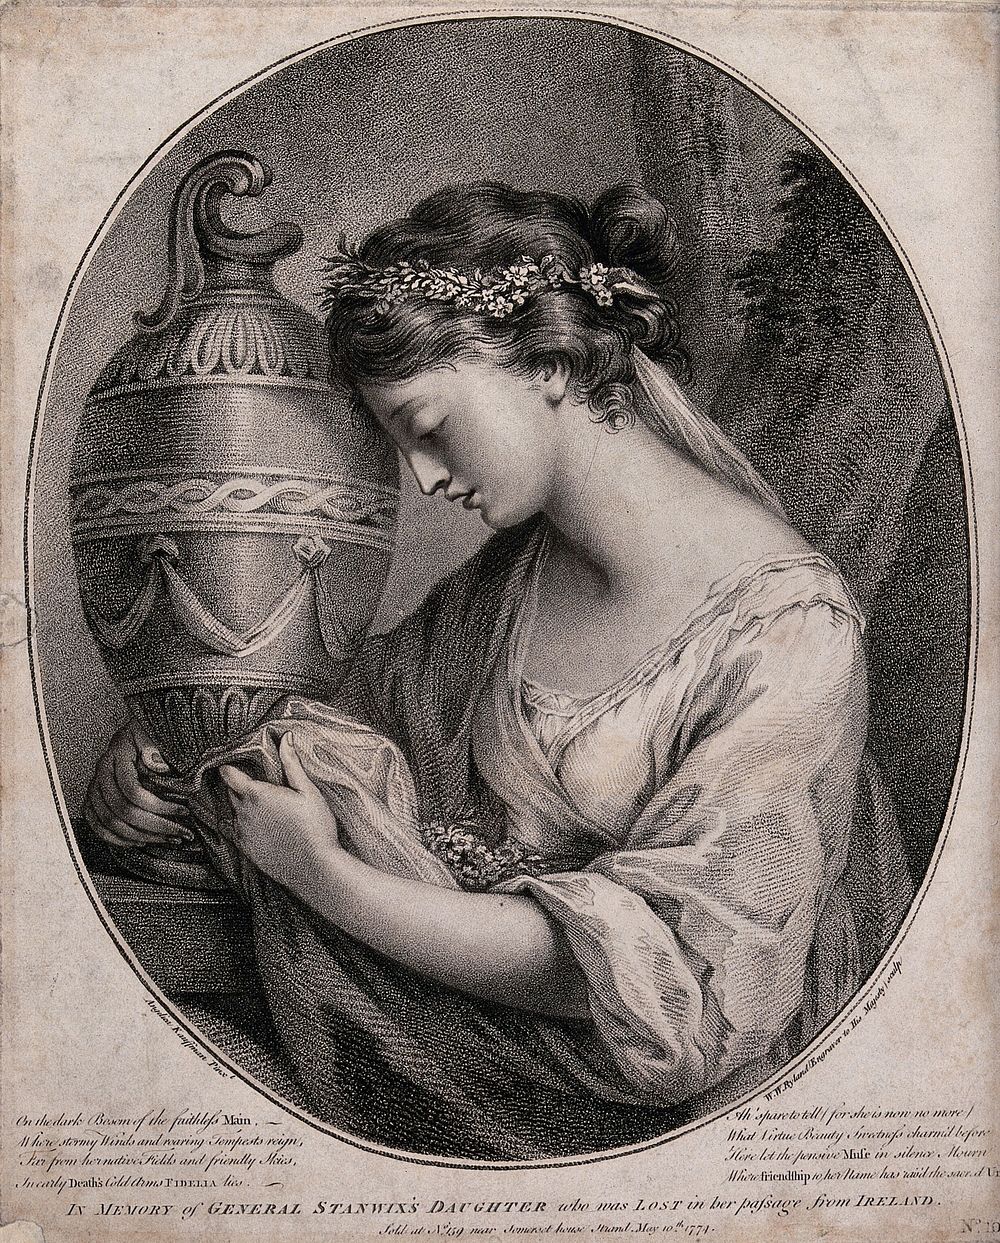 A young woman grieving and embracing an urn. Stipple engraving by W.W. Ryland after A. Kauffman, 1774.